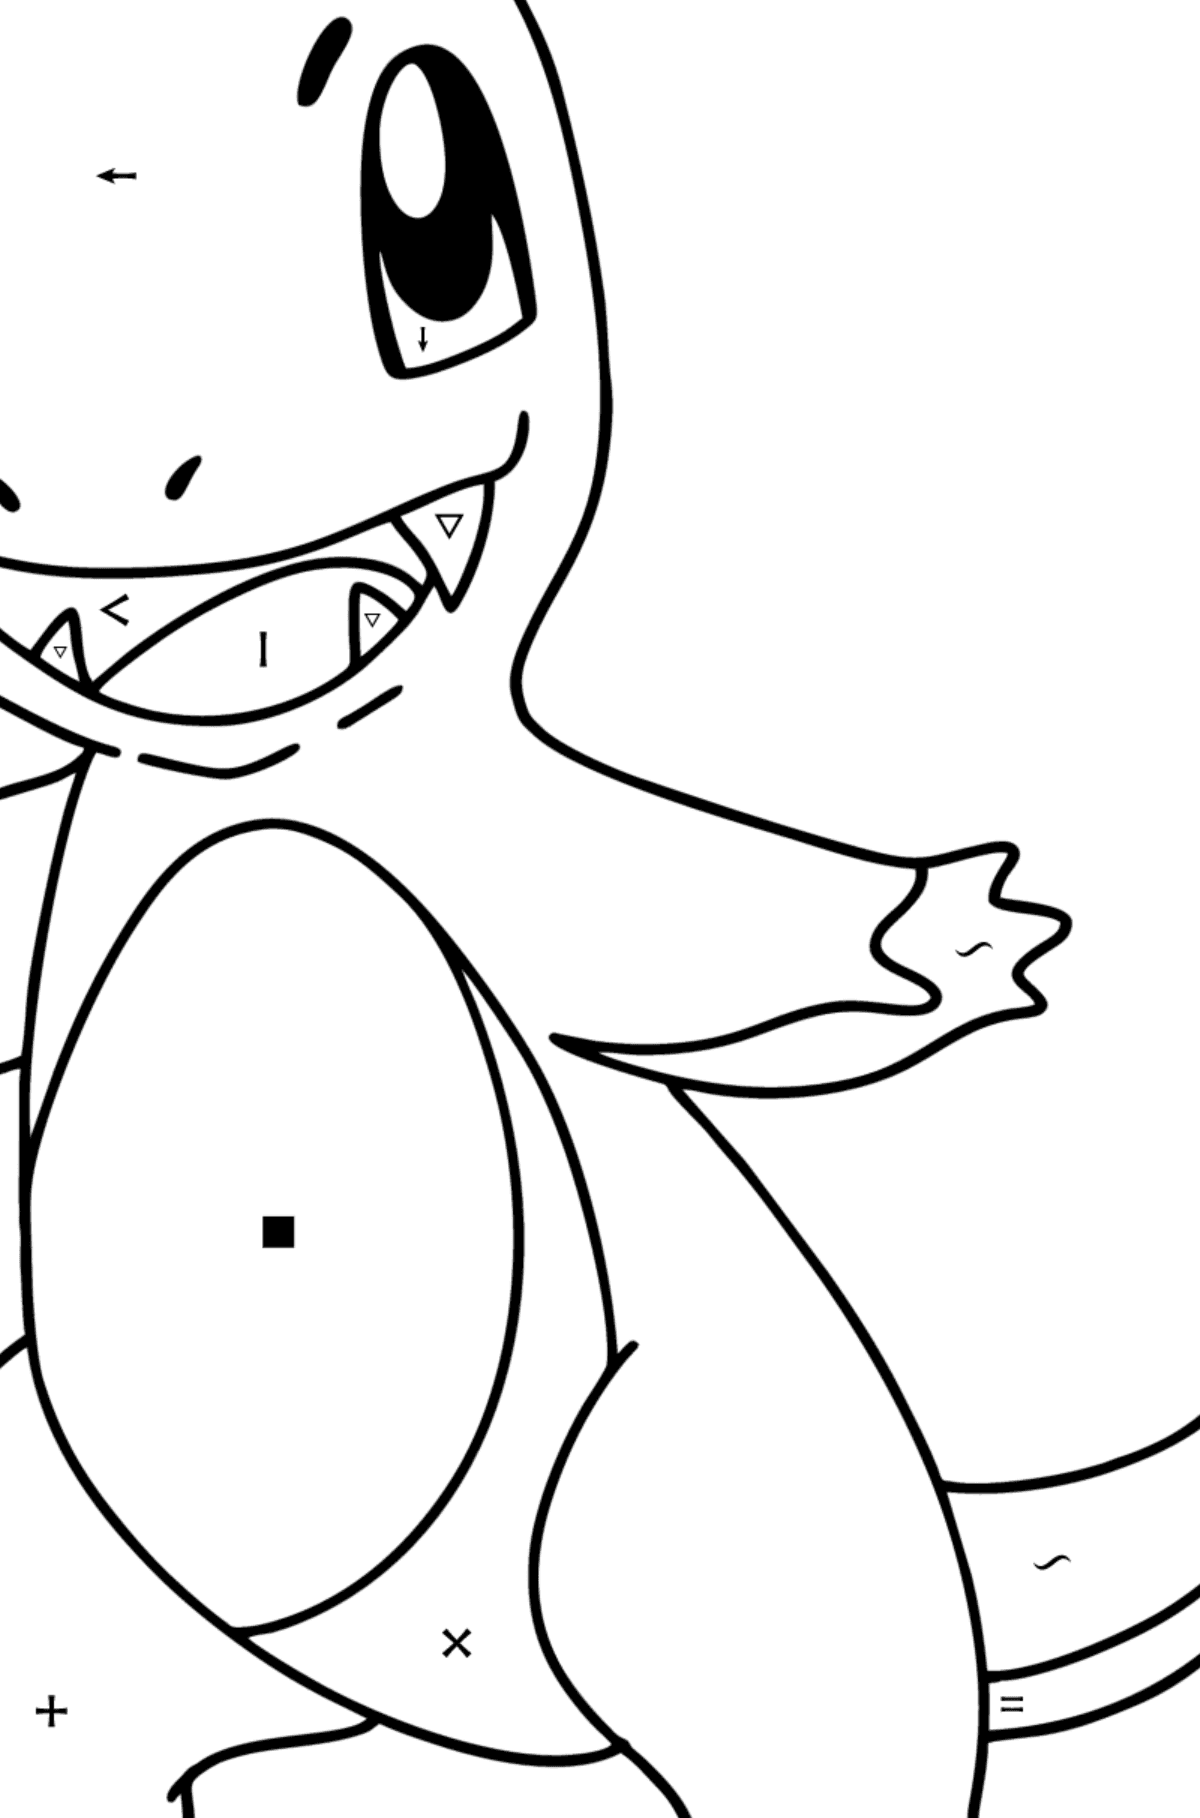 Pokémon Go Charmander coloring page - Coloring by Symbols for Kids